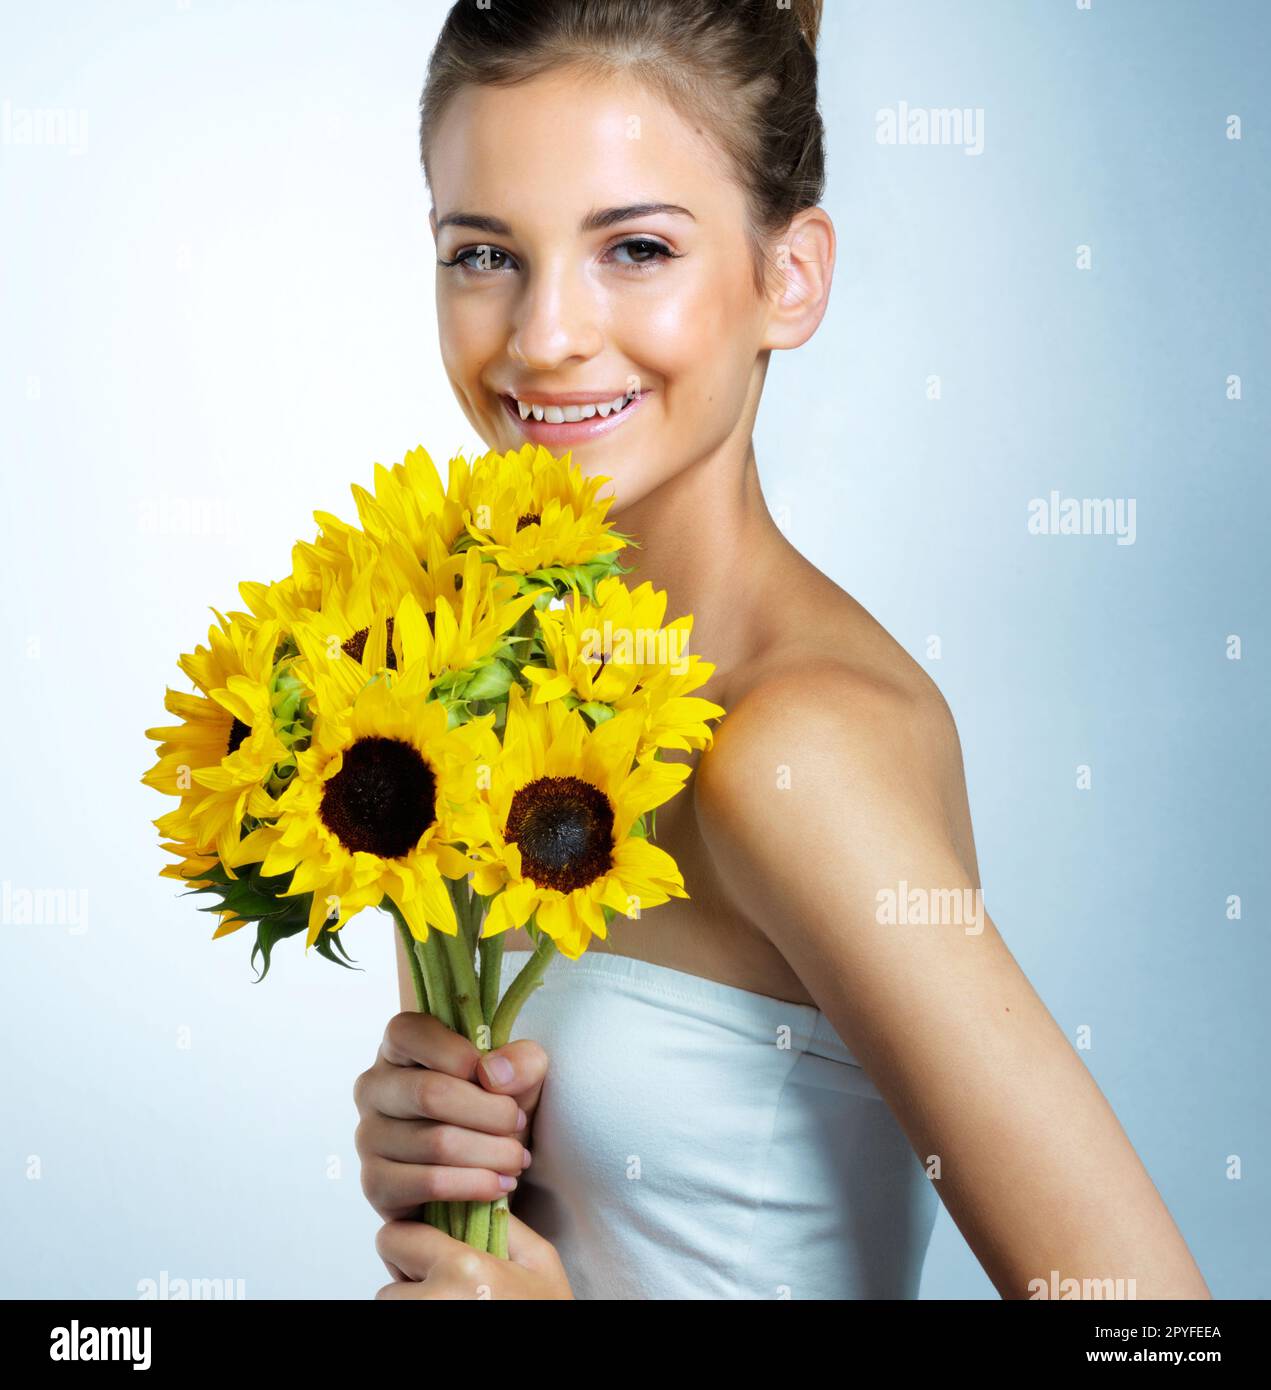 Flowers and femininity. Studio portrait of a beautiful young woman holding a bouquet of sunflowers. Stock Photo